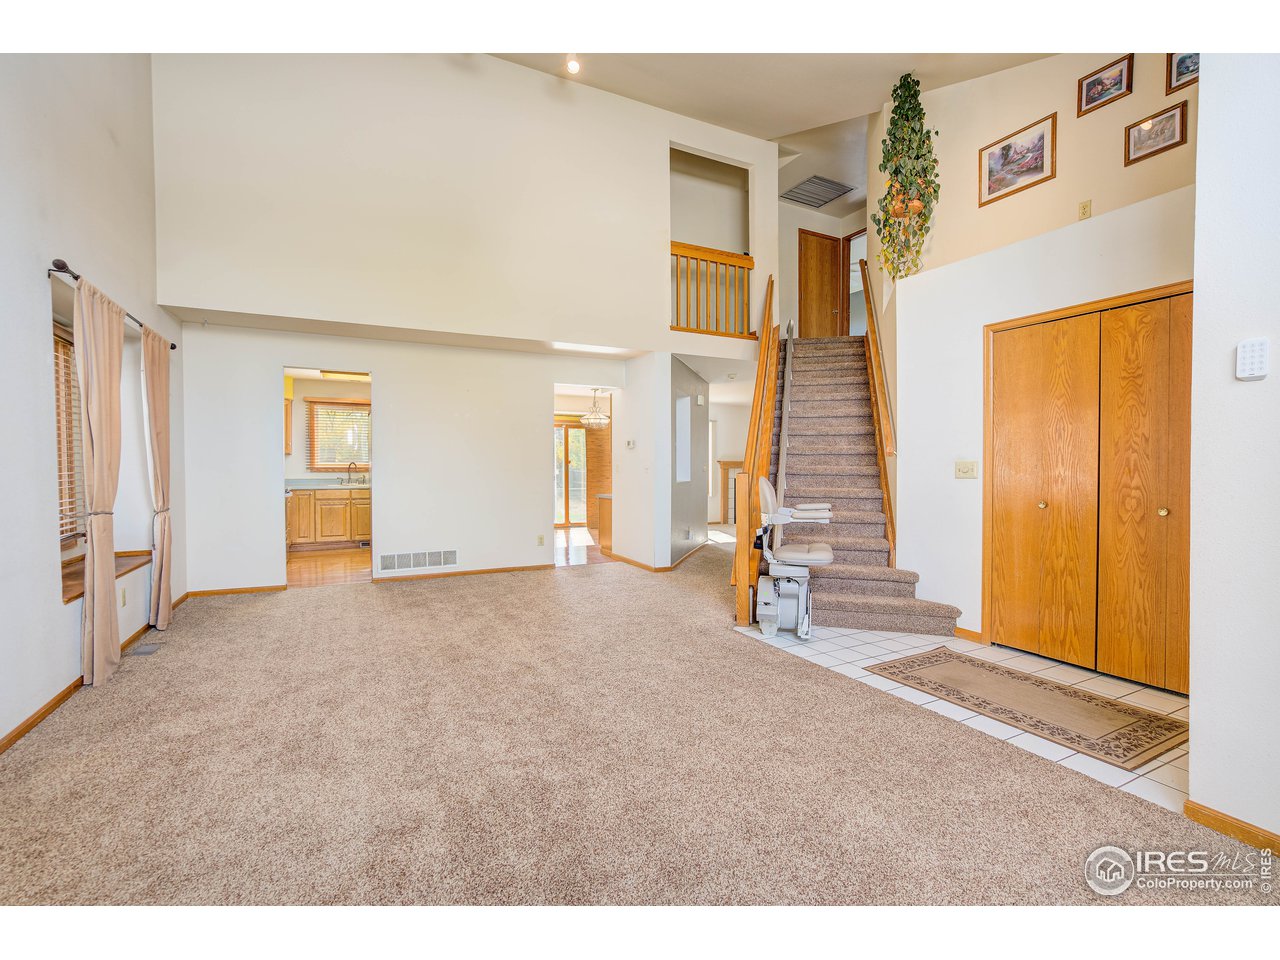 Living Room: 12 x 12 Formal Dining Room: 12 x 10  Step upstairs to find 4 sizable bedrooms & a full bathroom, and the owner suite with a luxury bath, walk-in closet & vaulted ceilings. 